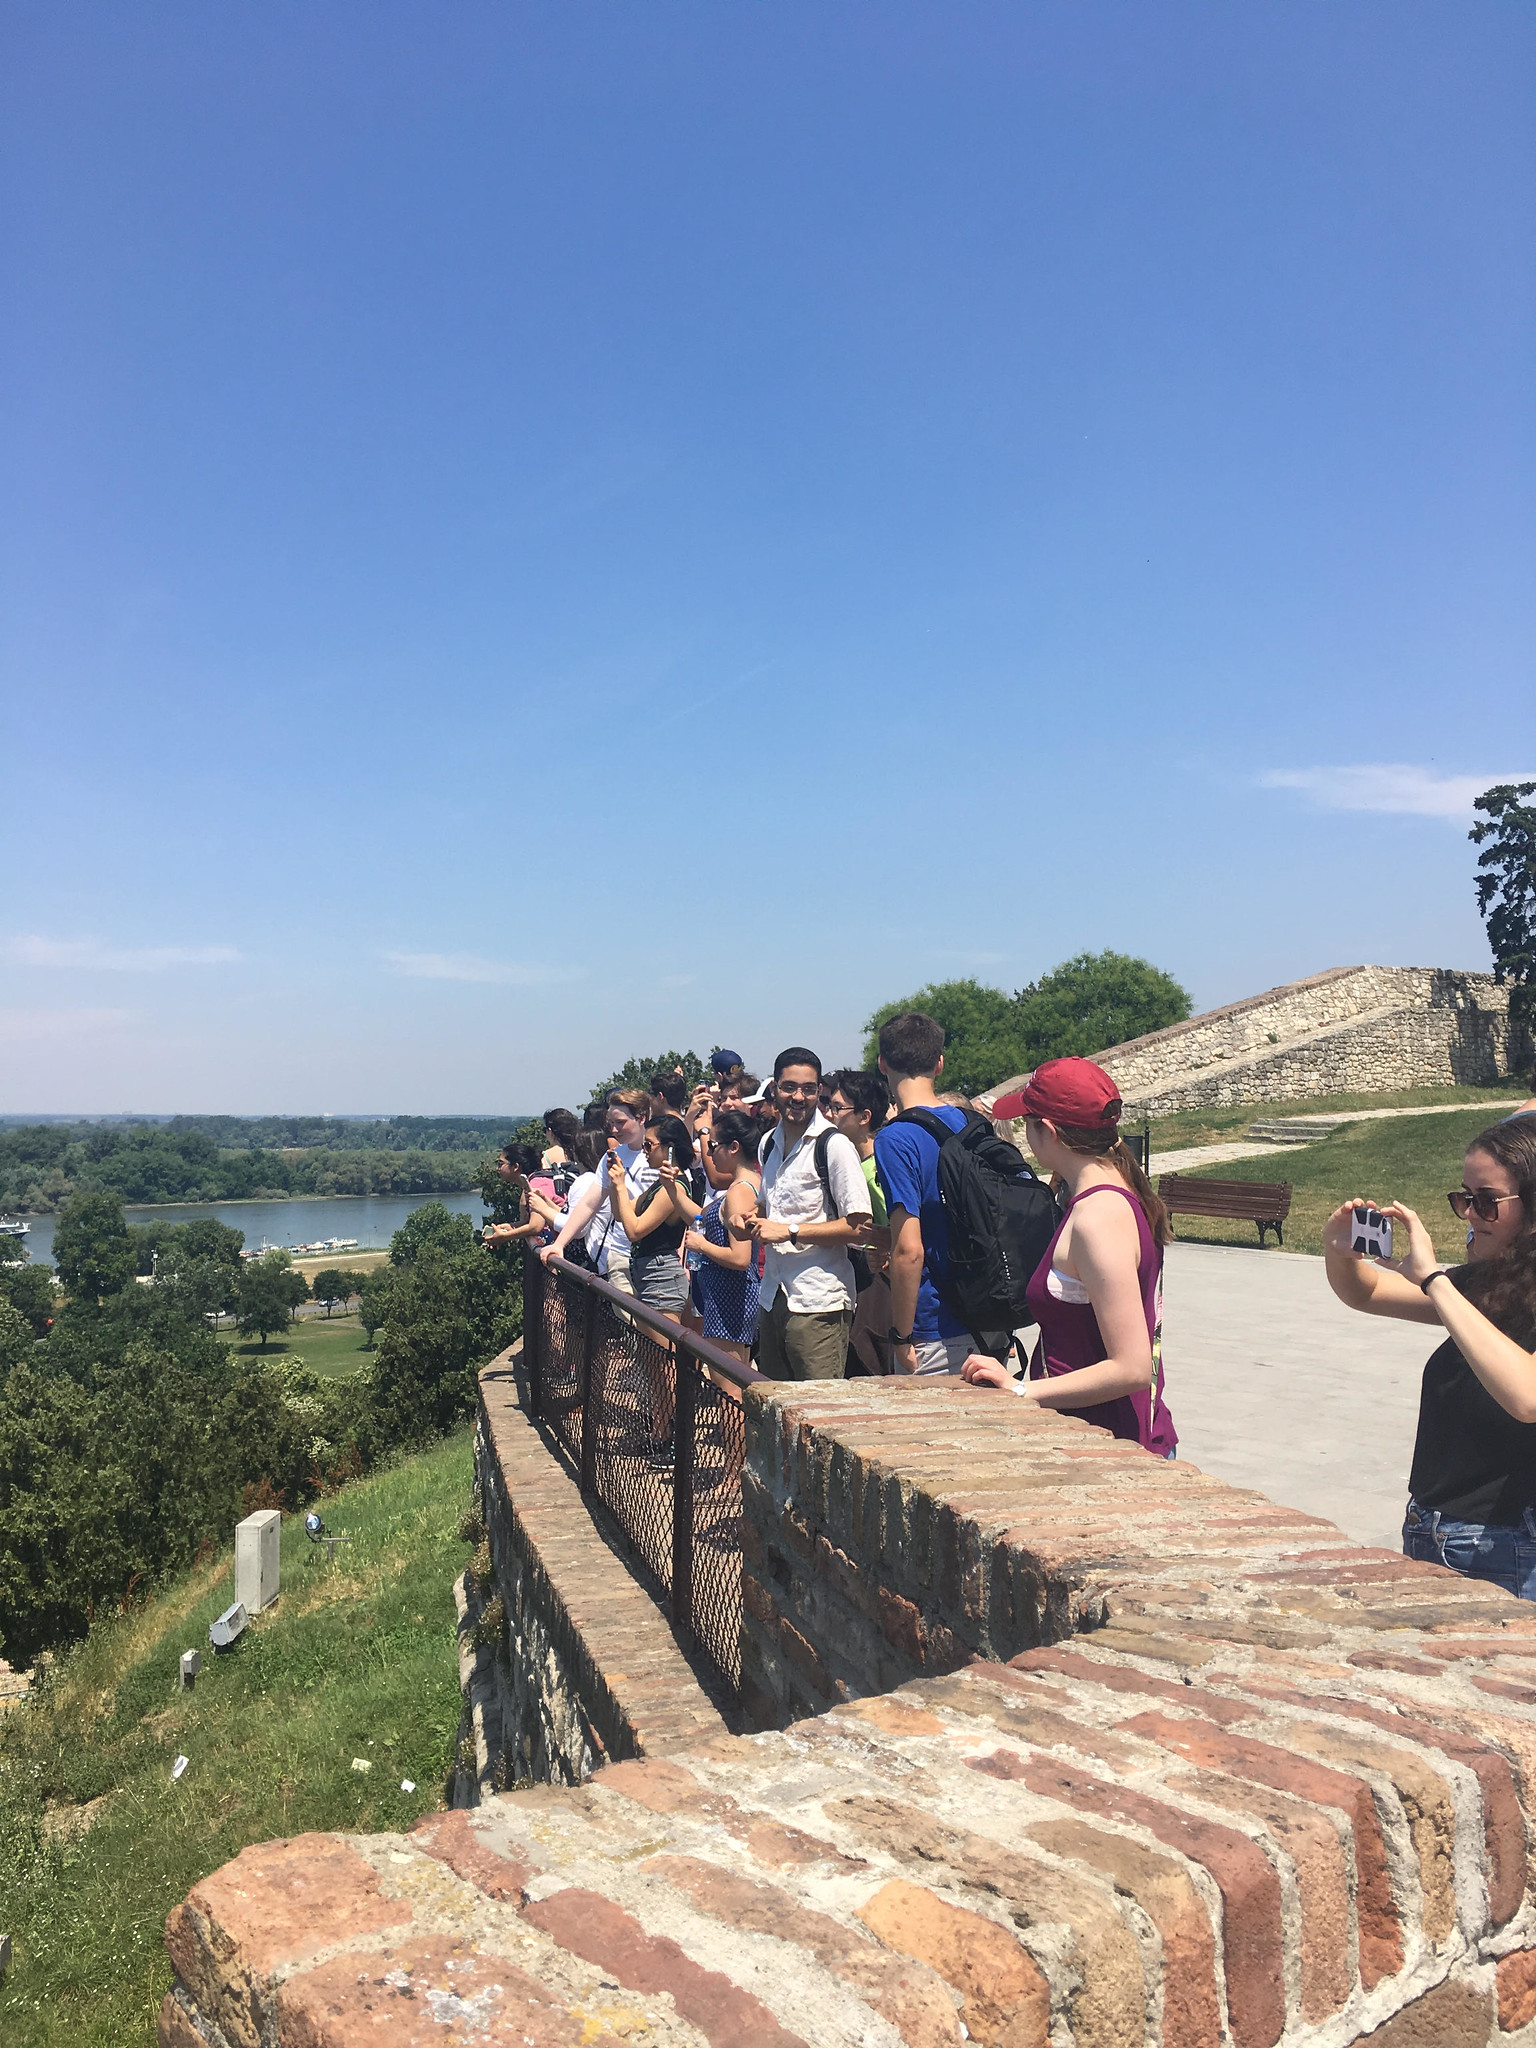 Students at the fortress in Belgrade